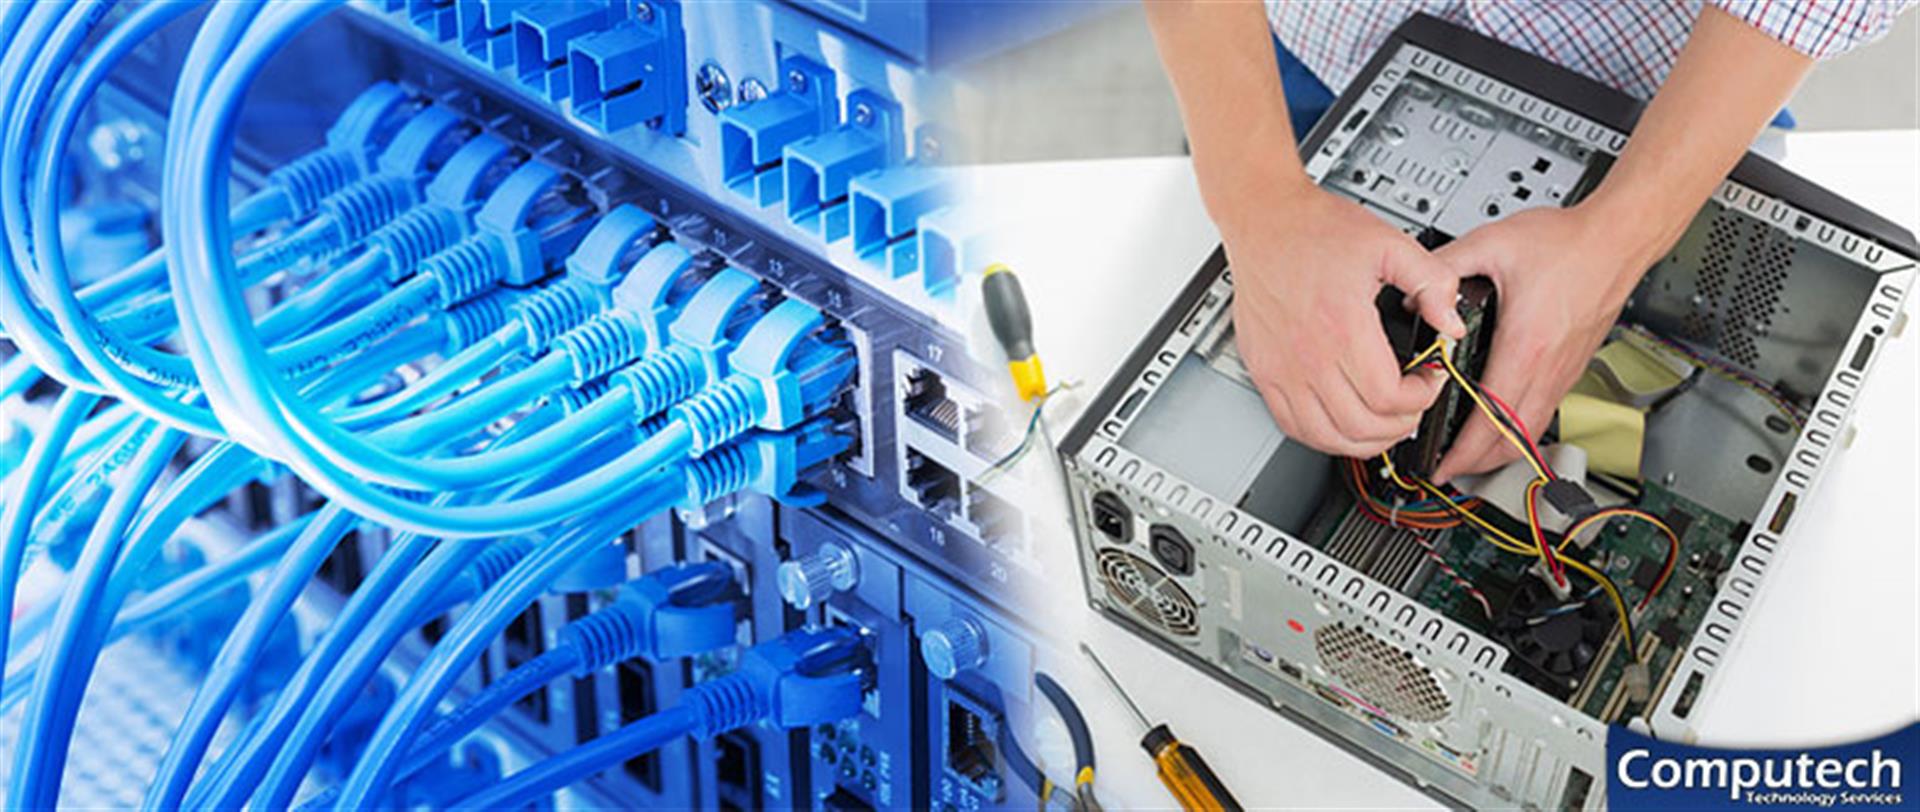 Falls Church Virginia Onsite Computer PC & Printer Repairs, Networks, Voice & Data Cabling Services